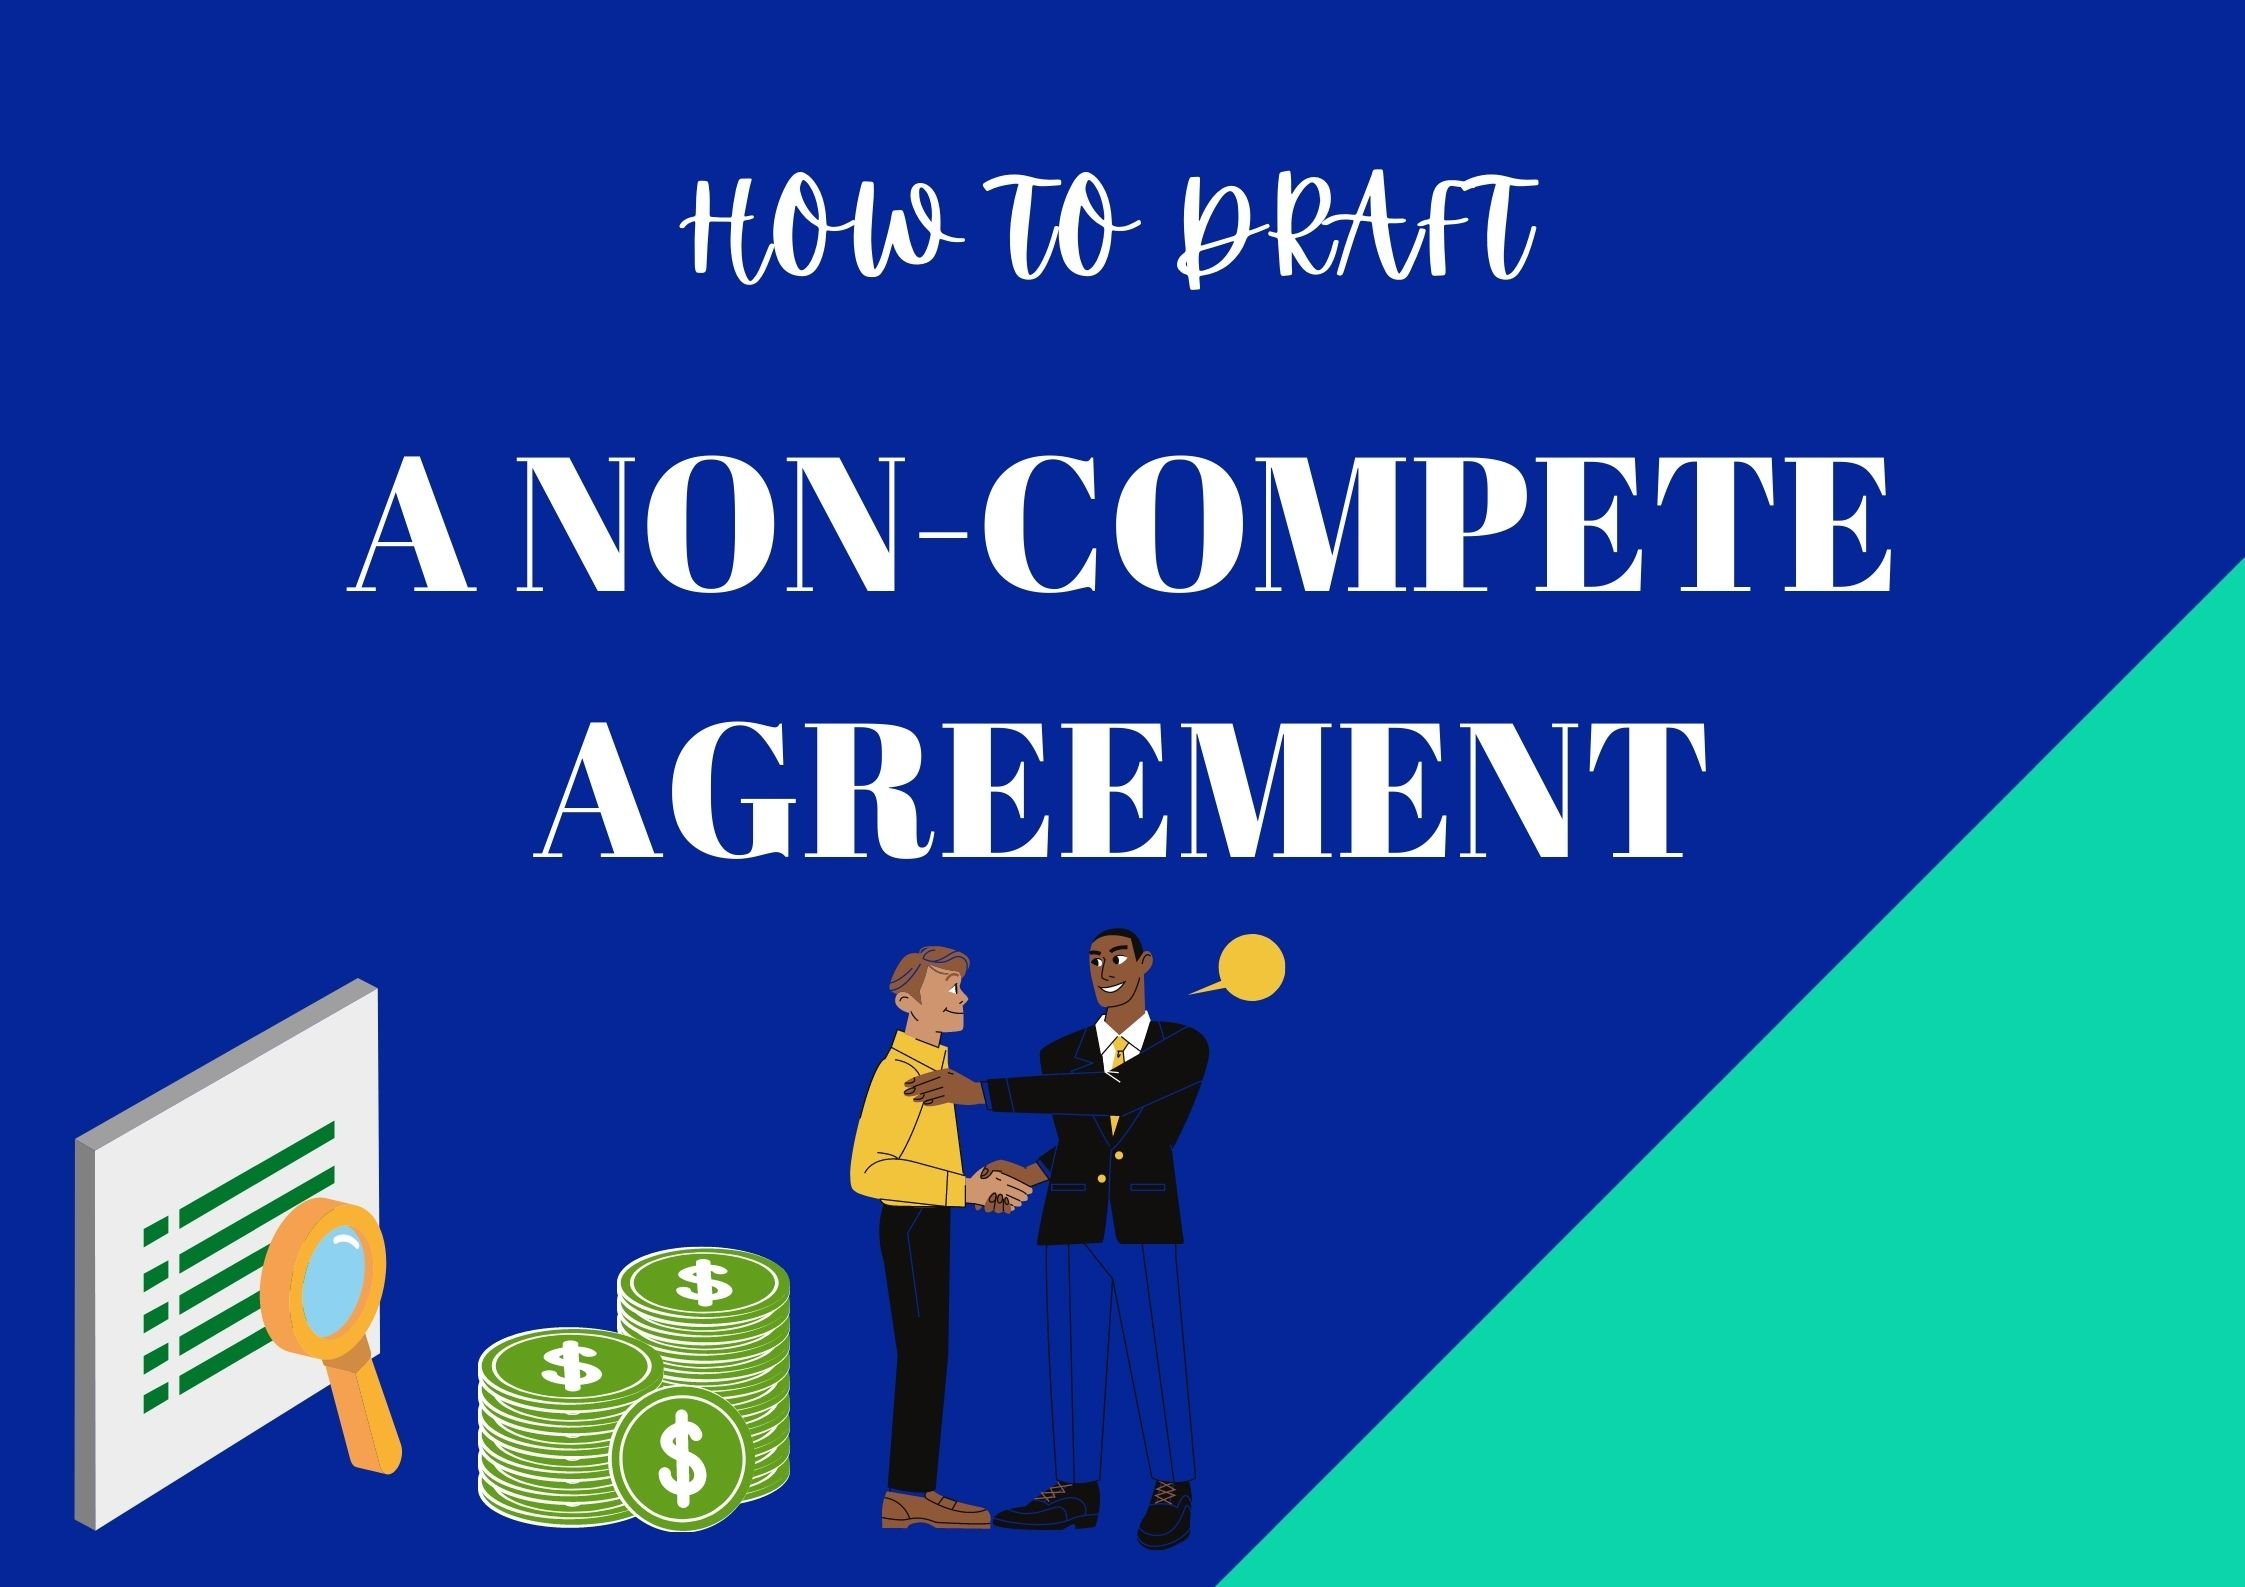 HOW TO DRAFT A NON-COMPETE AGREEMENT